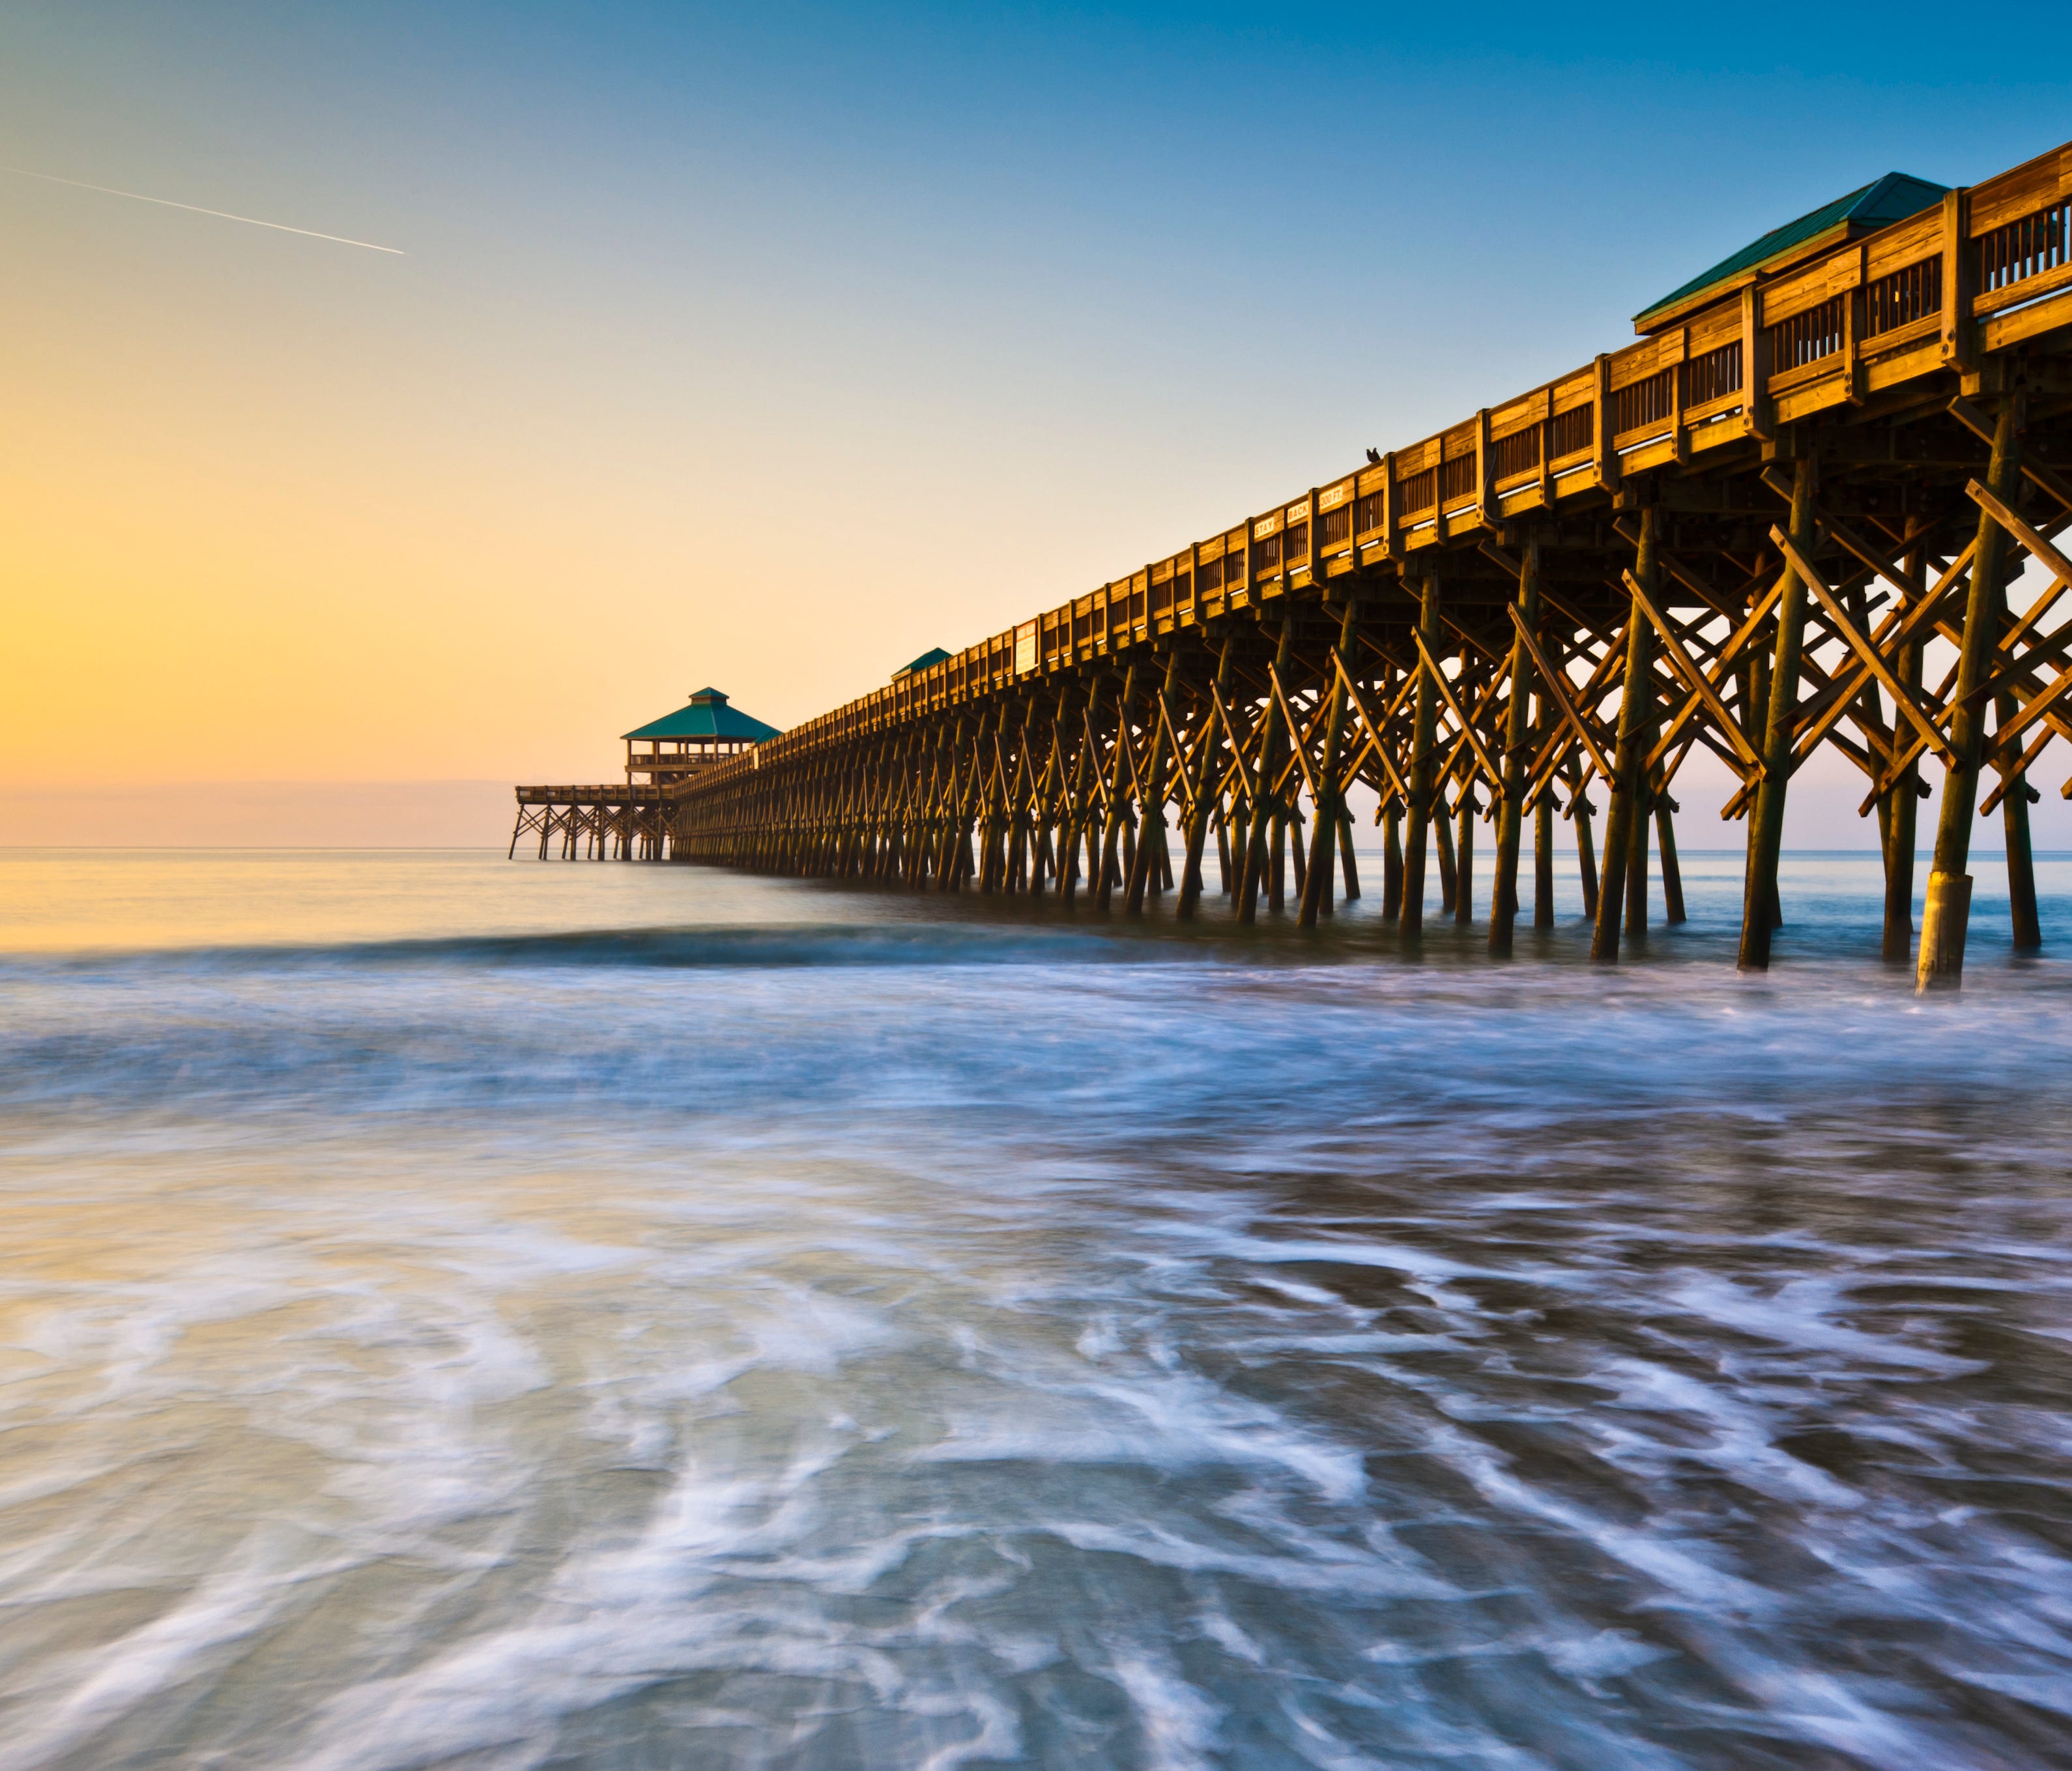 If Myrtle Beach is Disneyland by the sea, Folly is the archetypal flip-flops-and-cold-beer beach town that used to be common along the Southeastern coast.